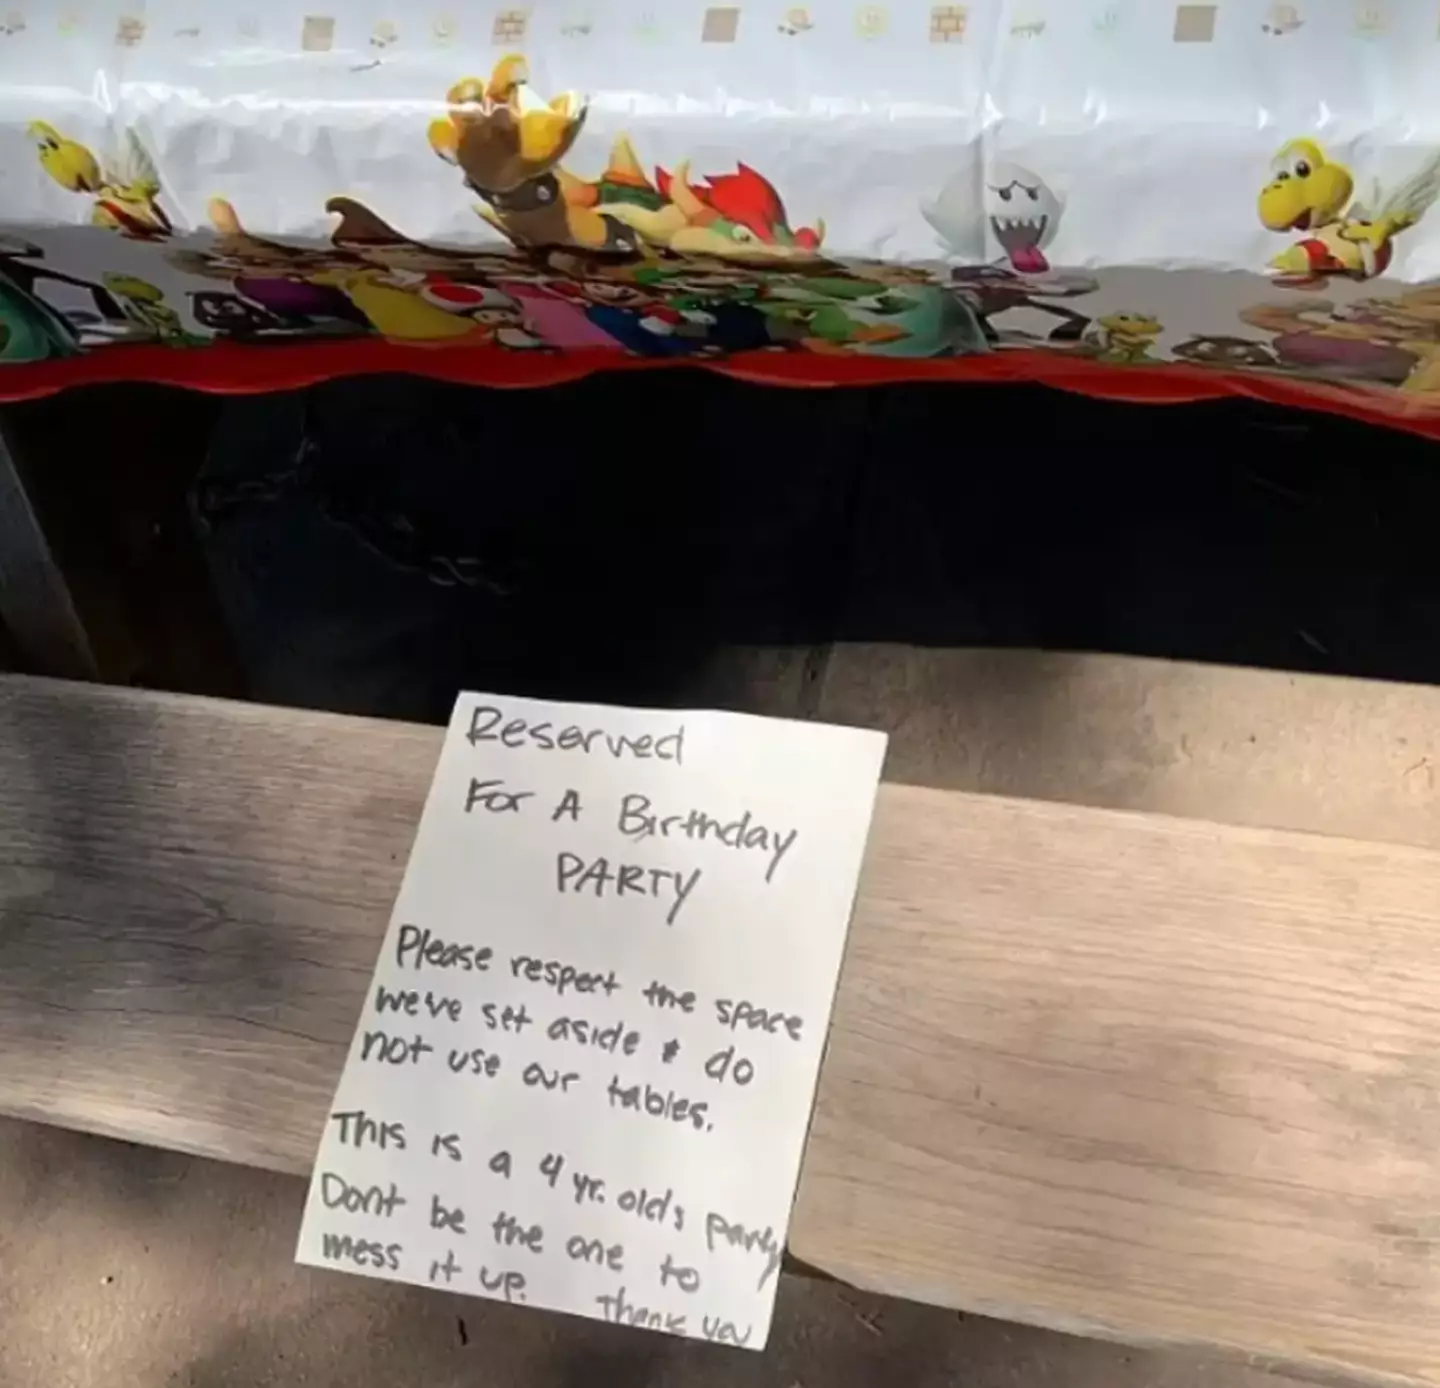 The Redditor shared a picture of the note.